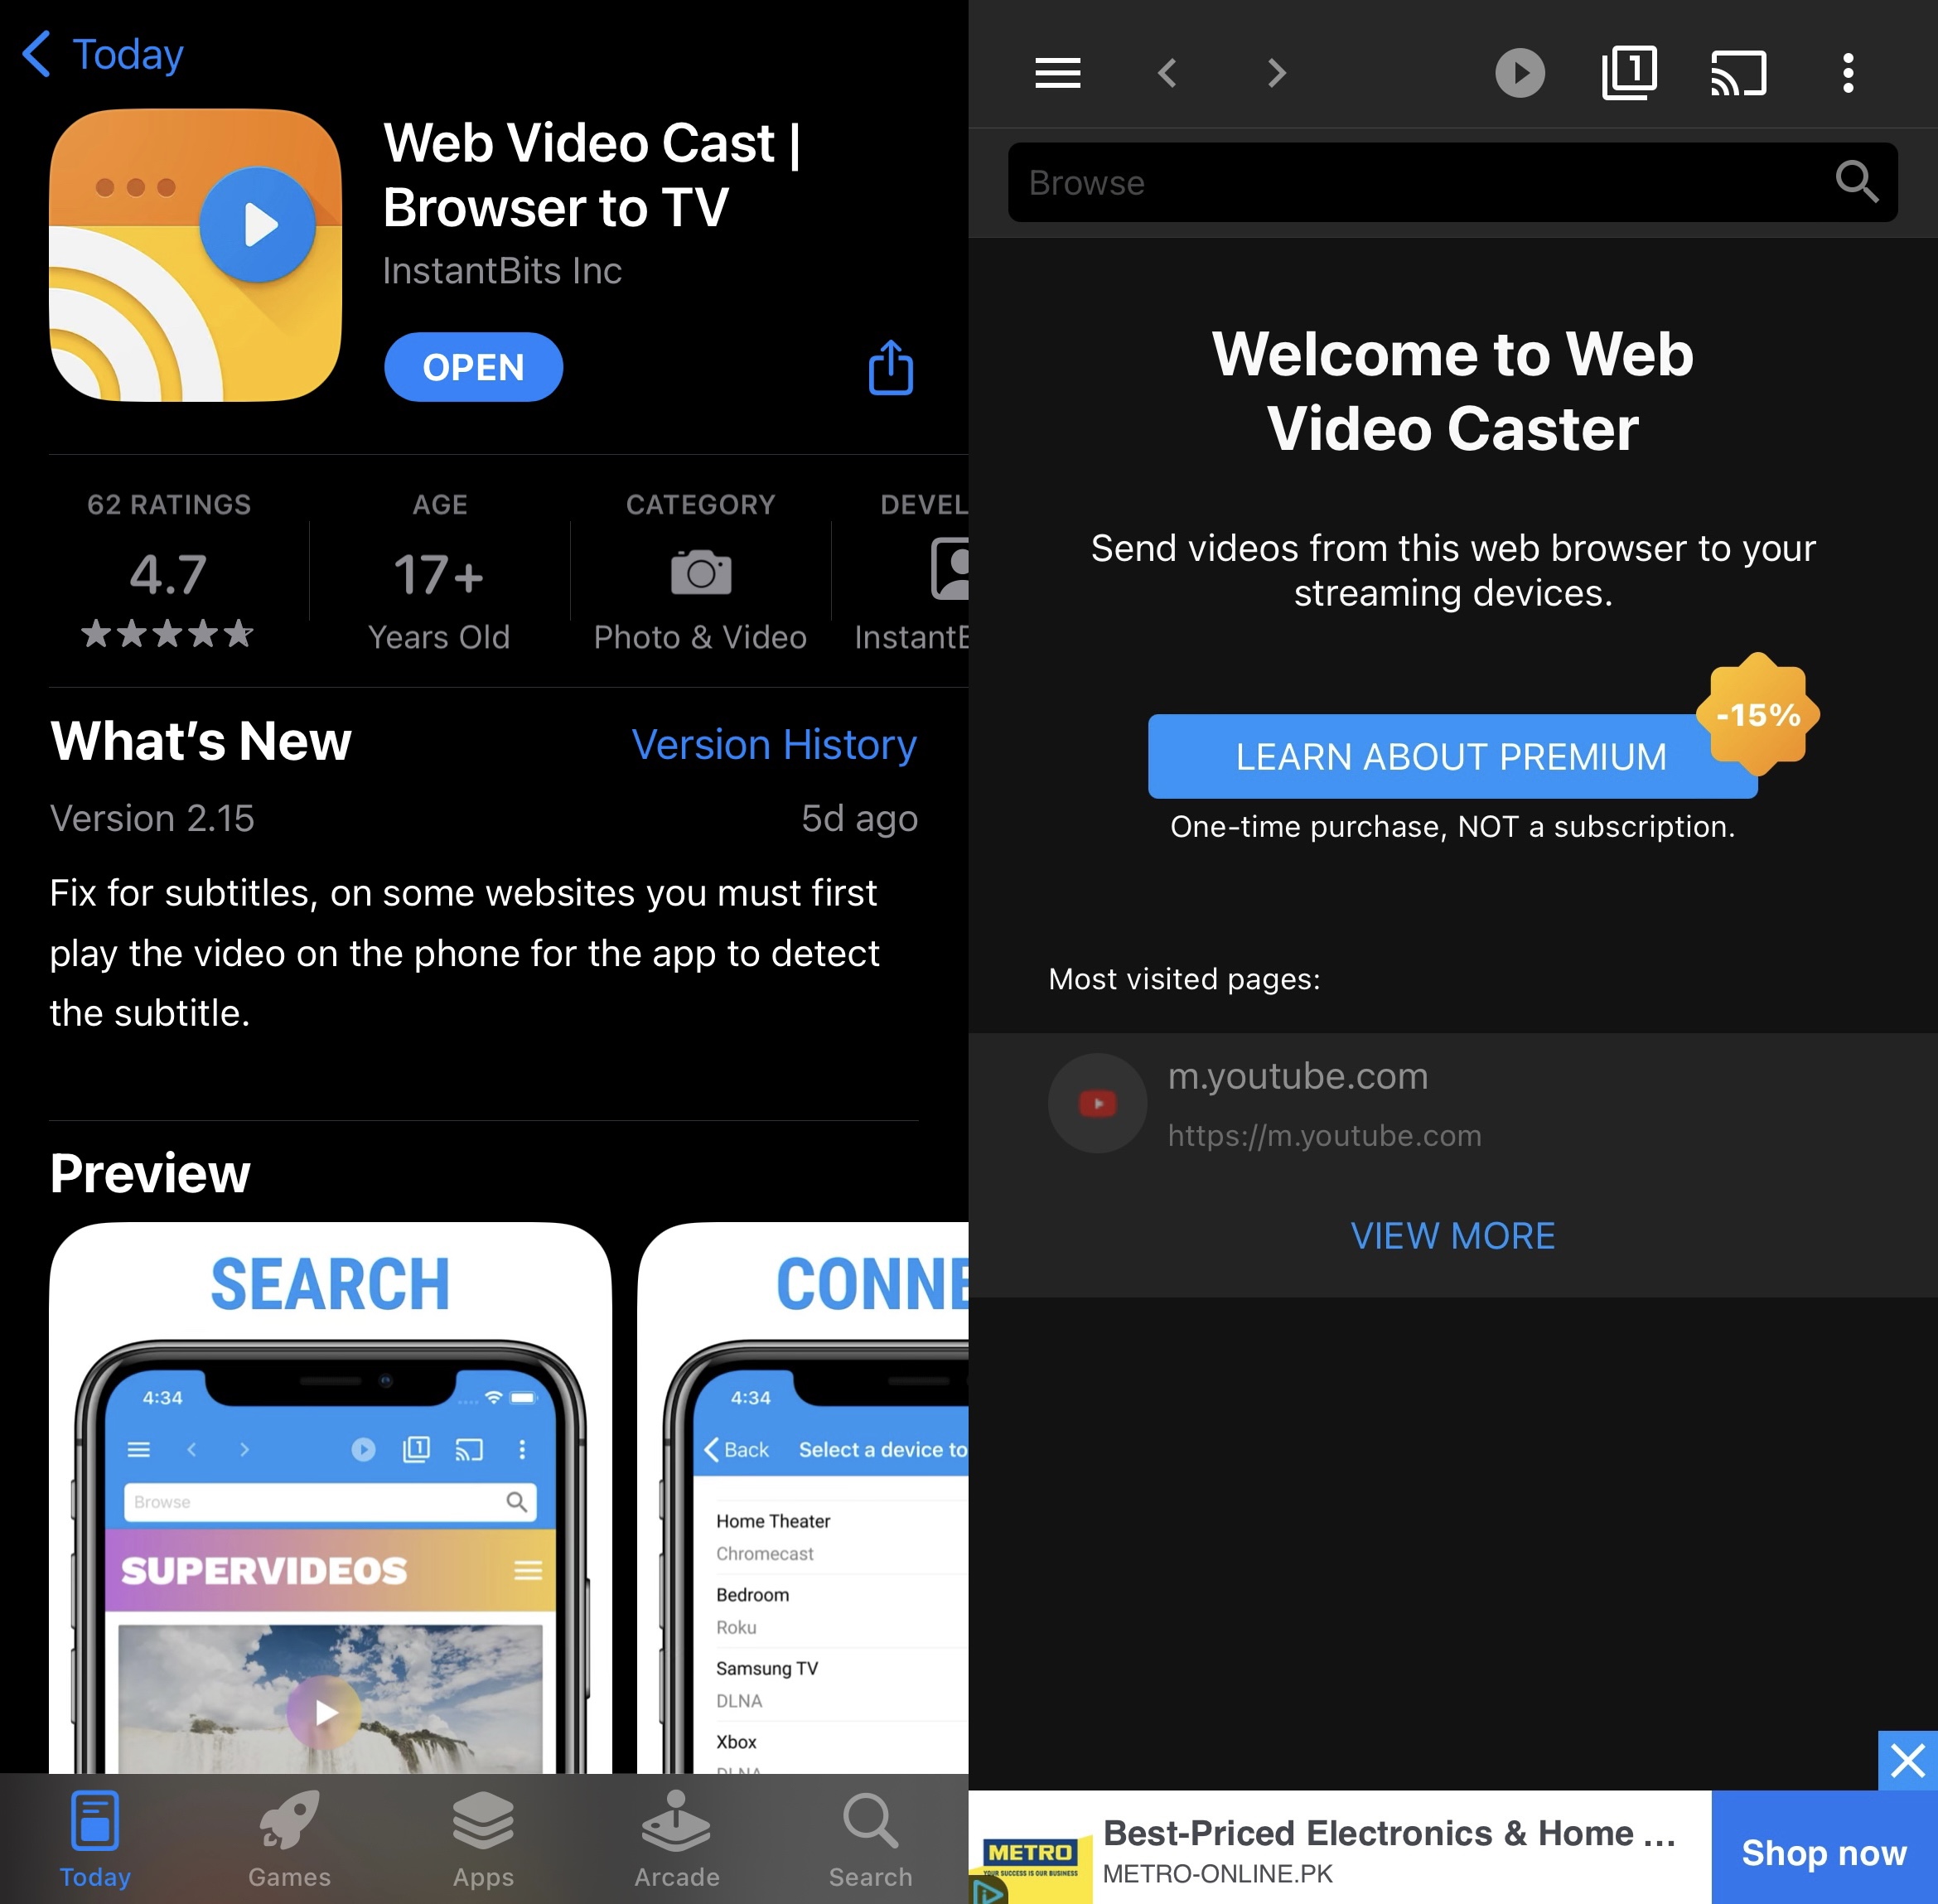 Web Video Cast is a free Chromecast app on the App Store